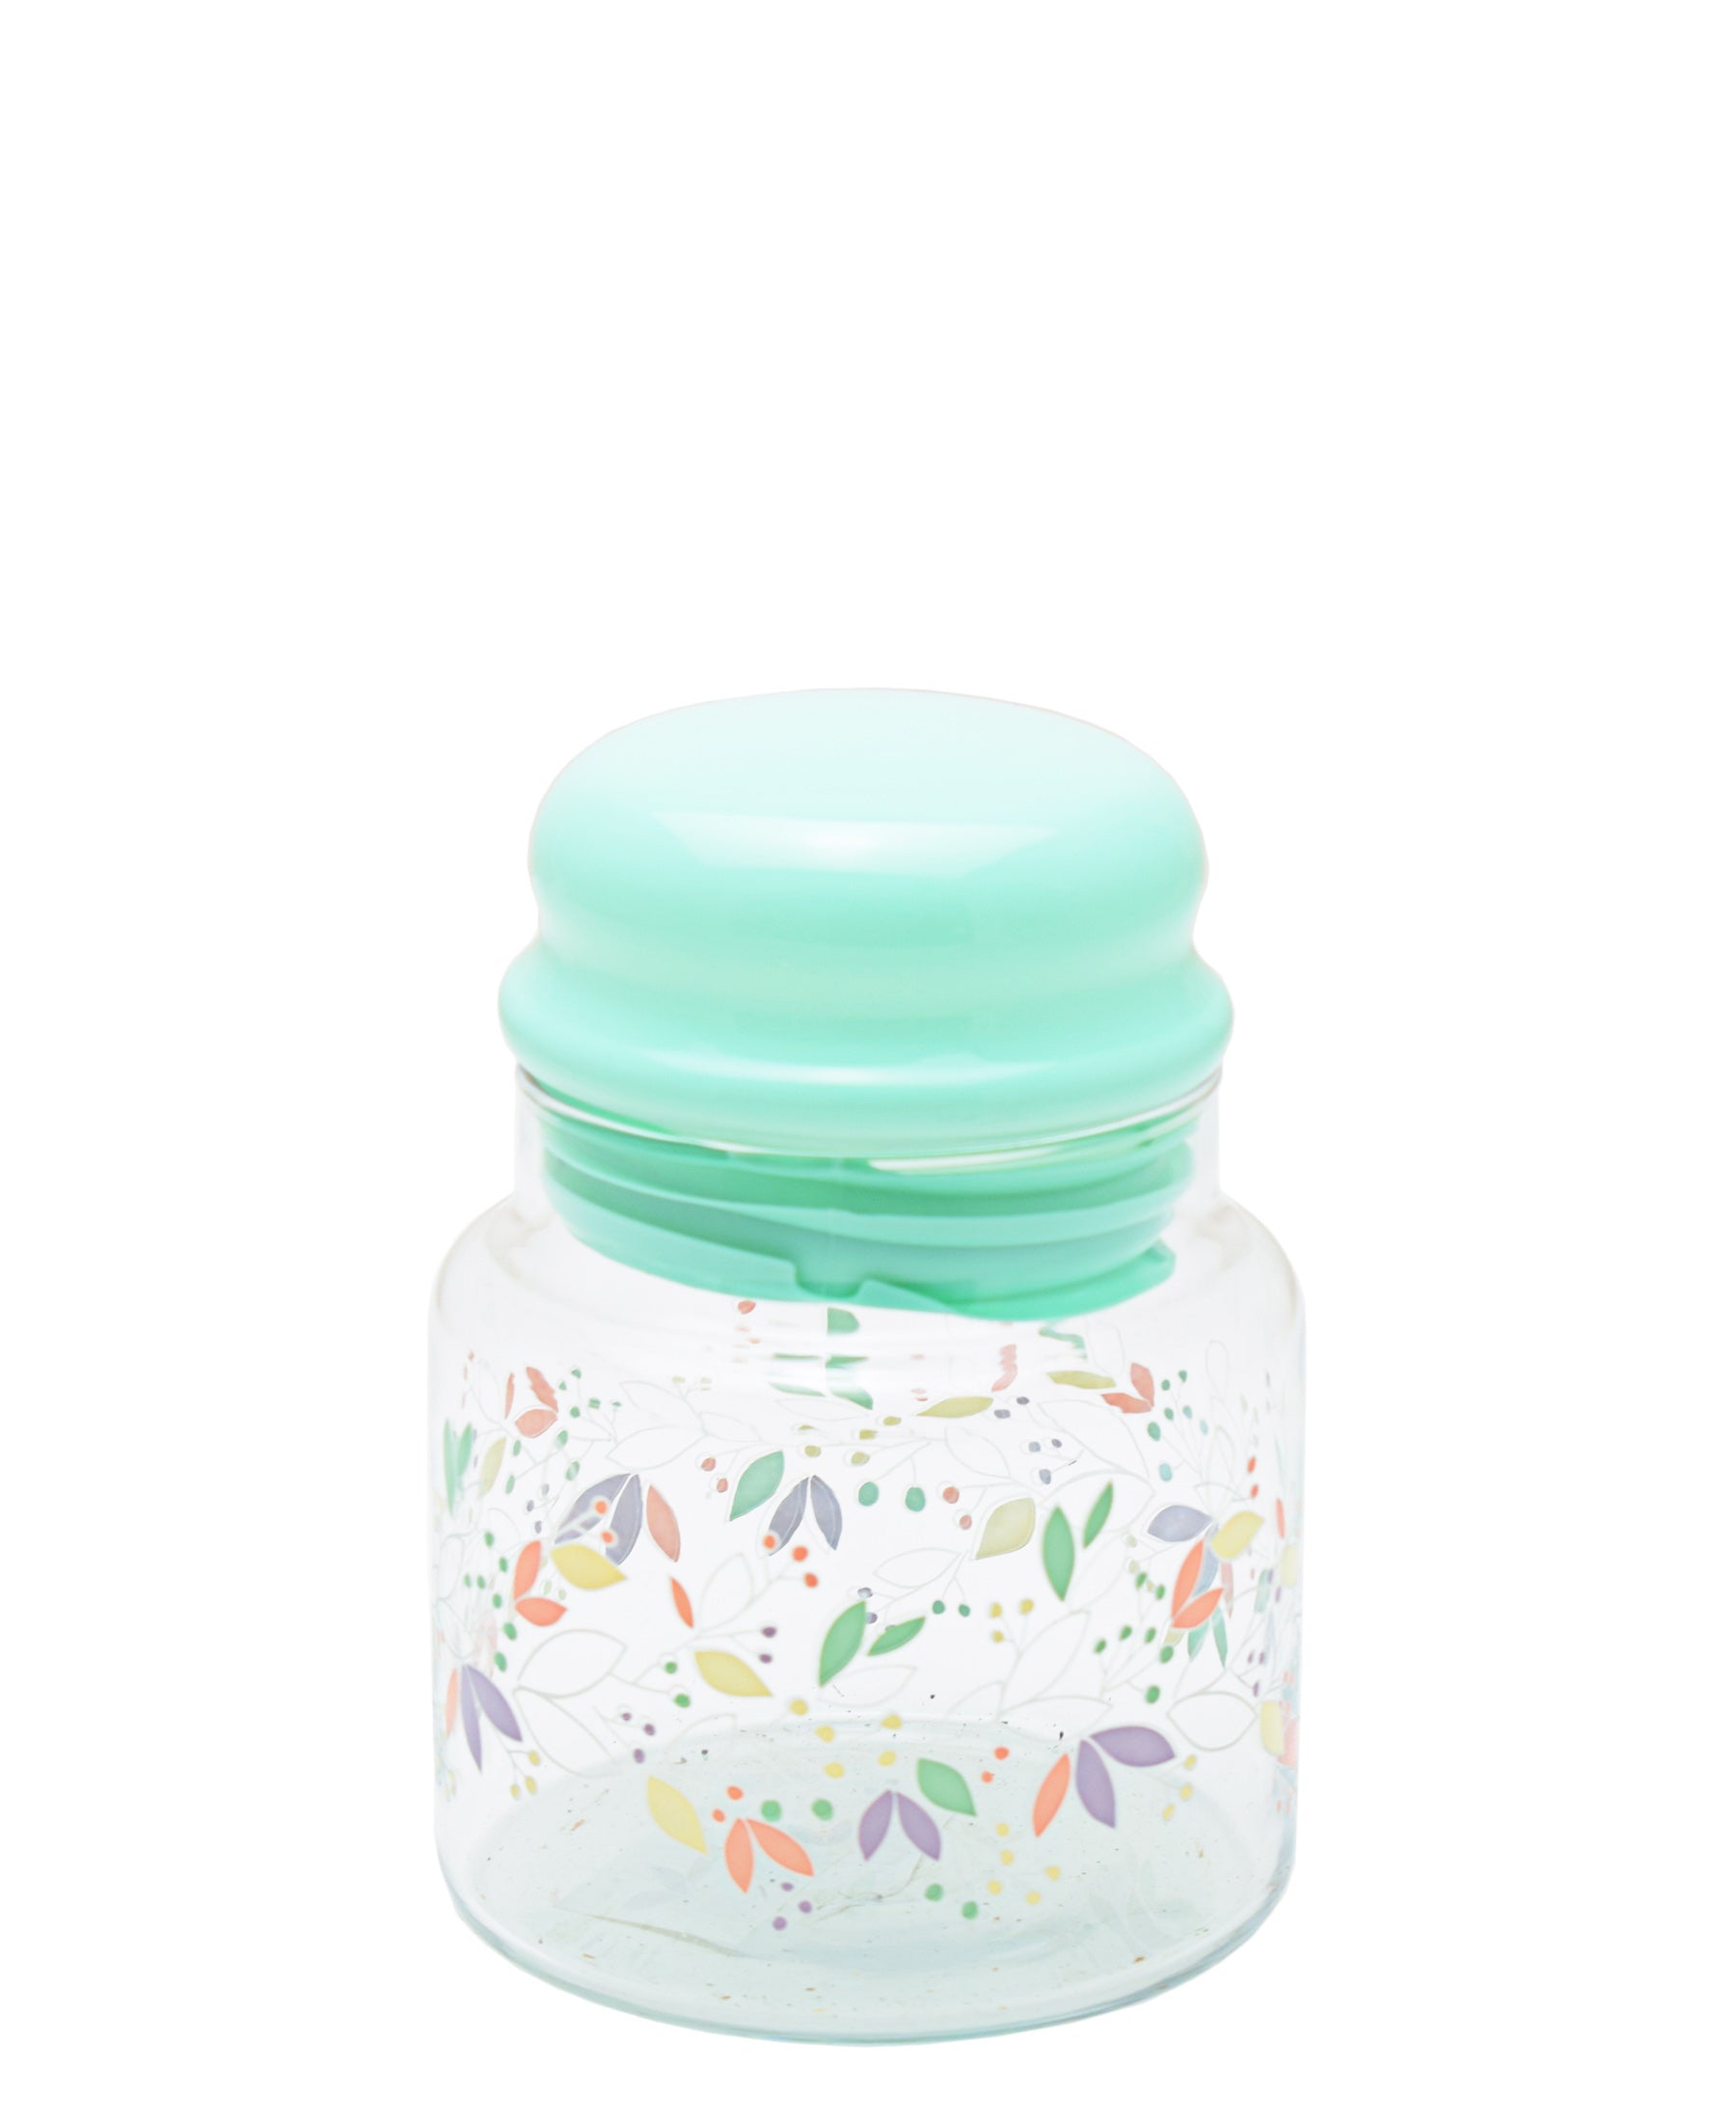 LAV 635ml Glass Jar With Lid - Green